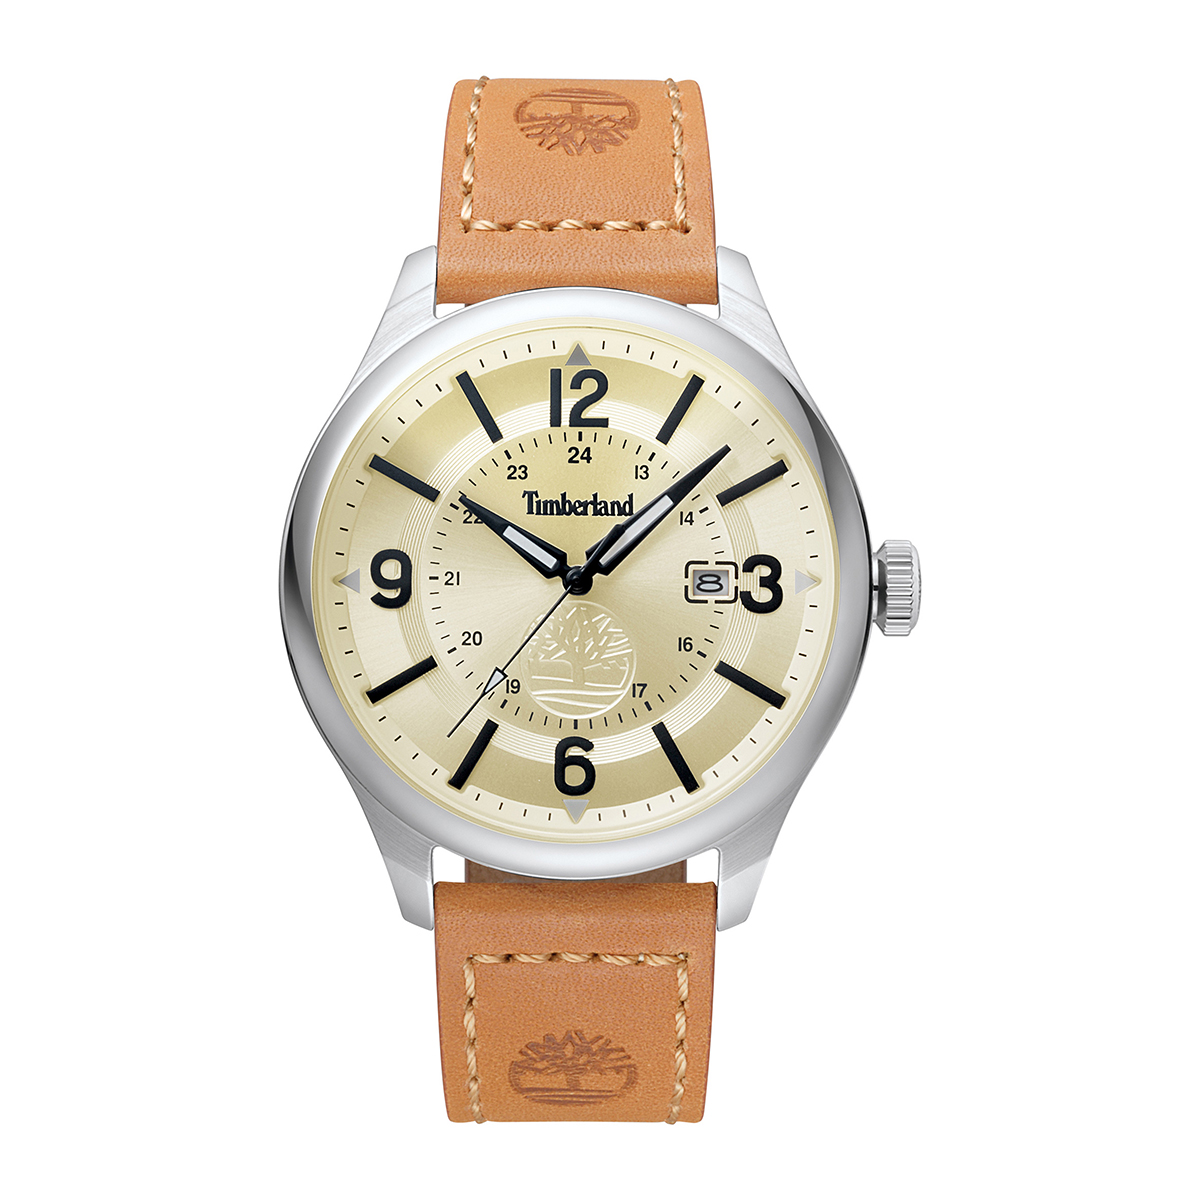 Mens Timberland Brown/Silver Watch - TBL14645JY04